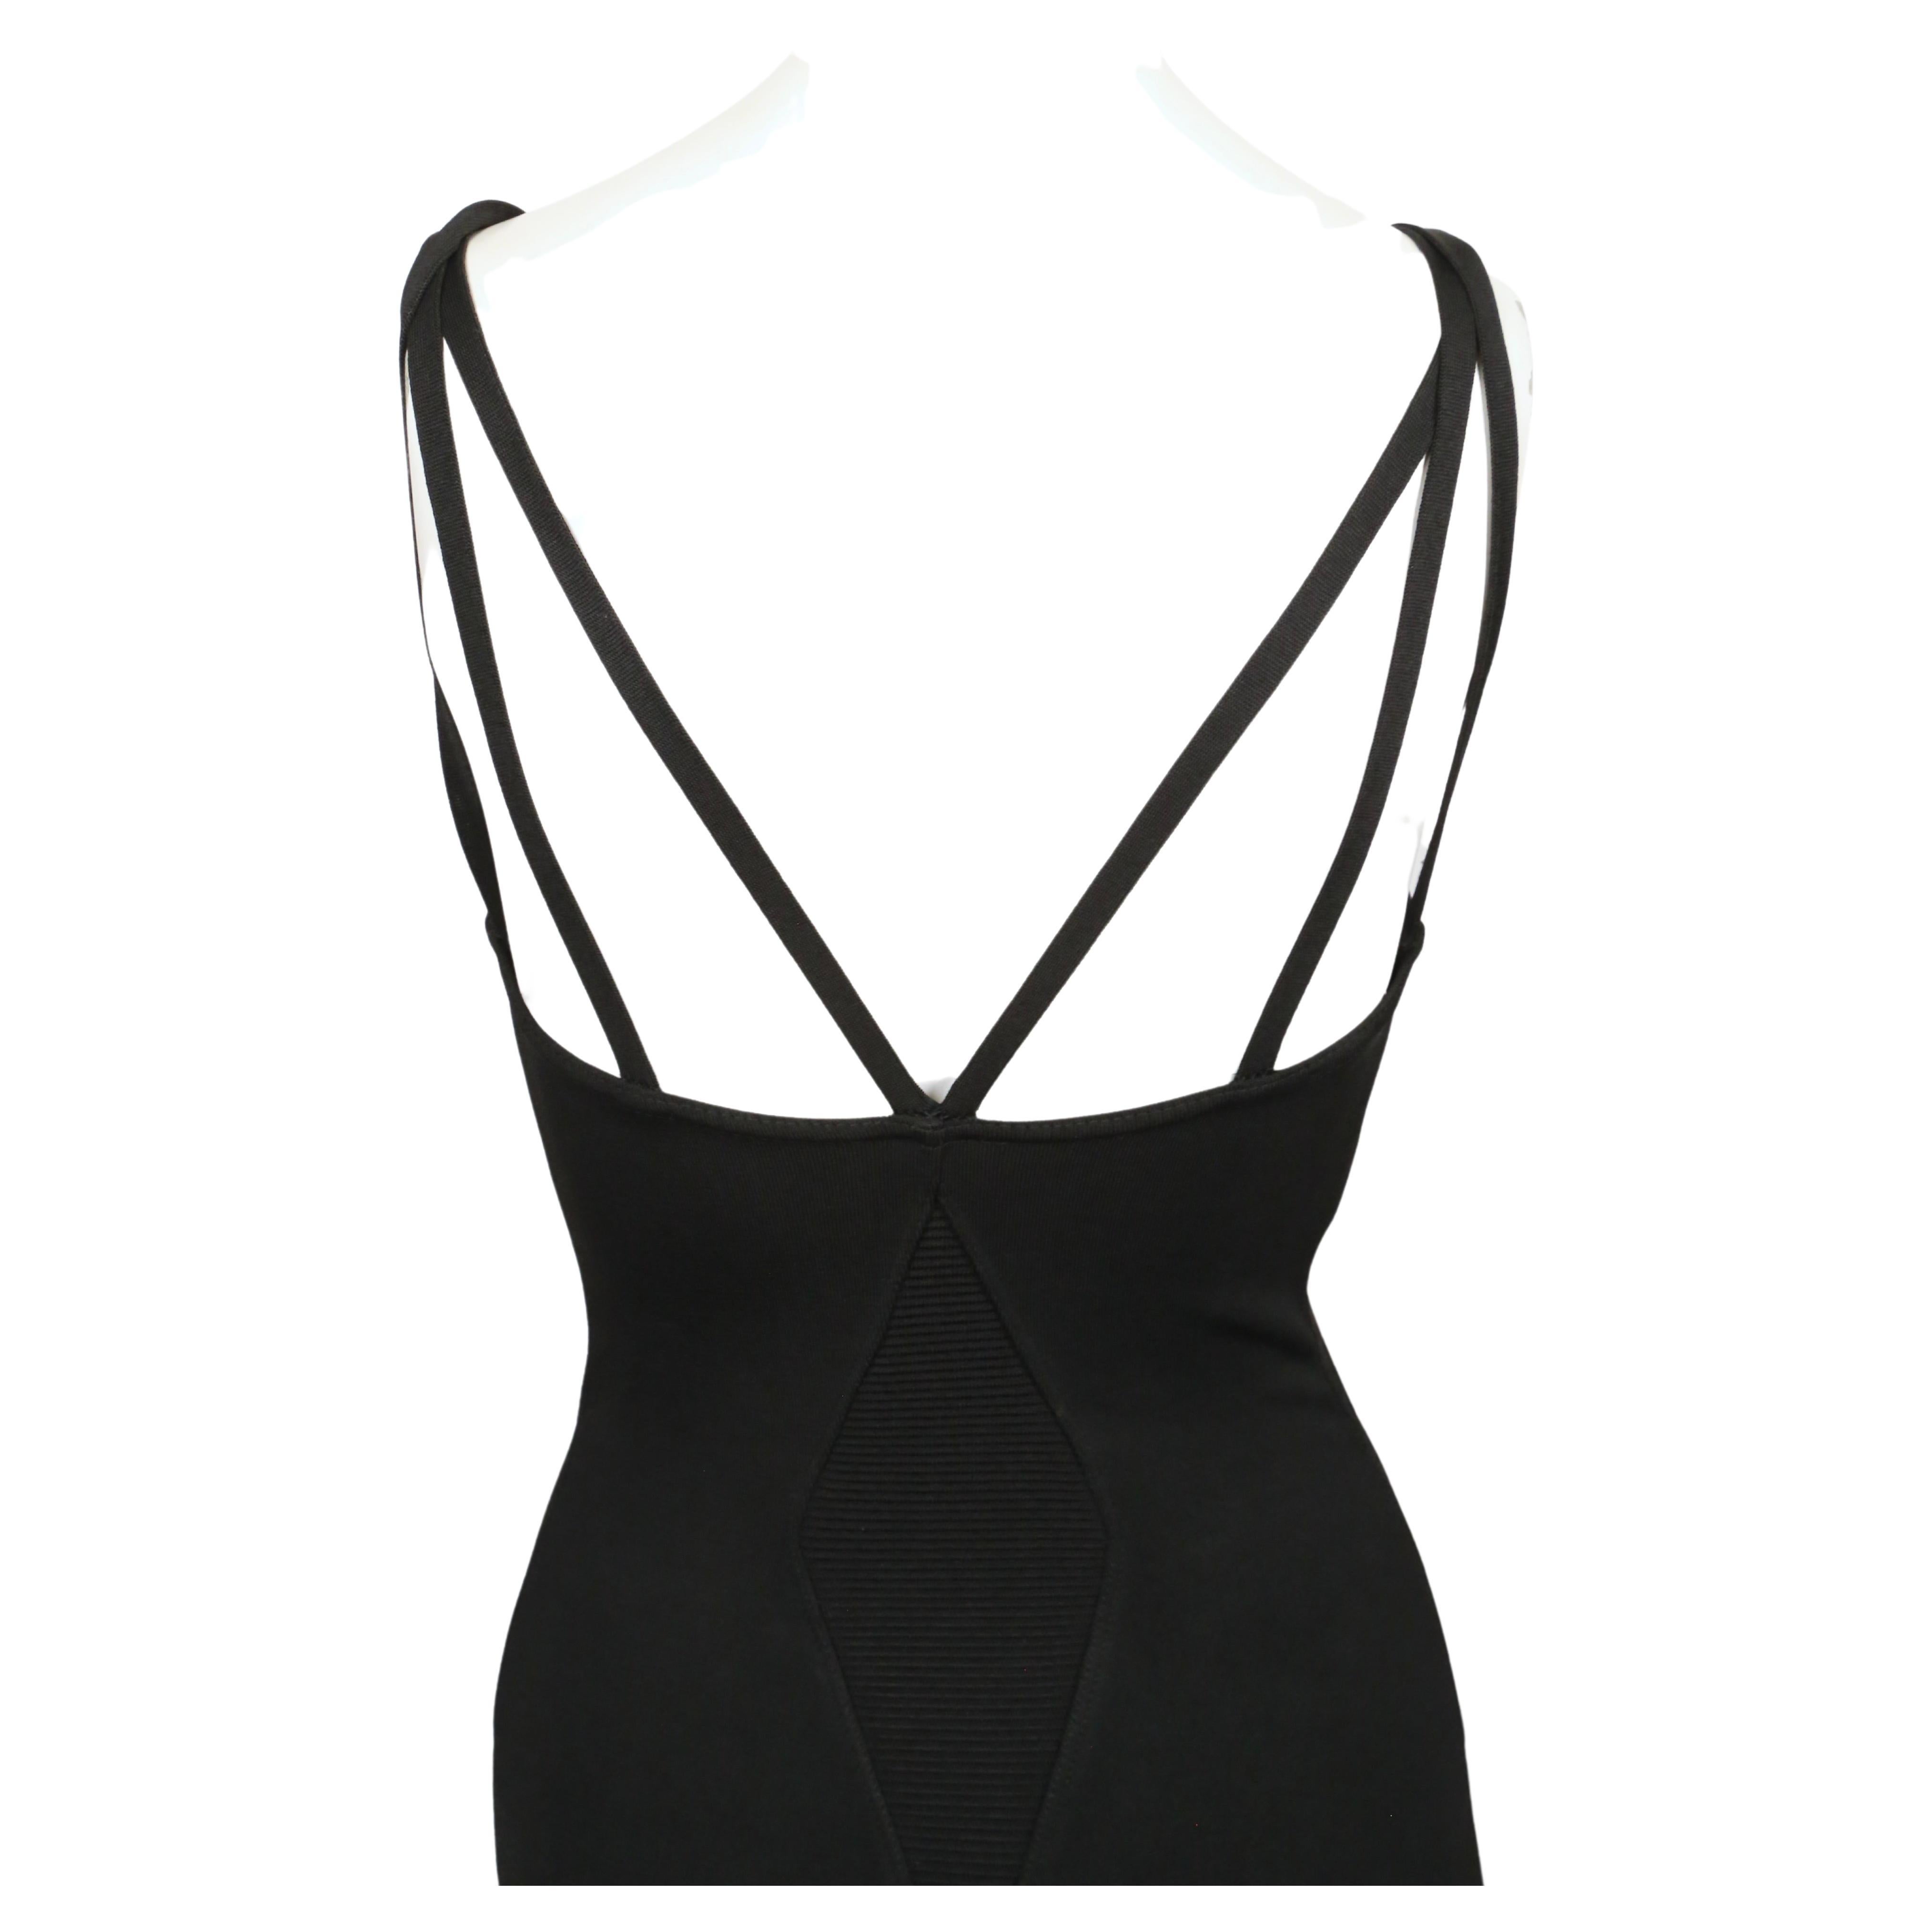 1990 AZZEDINE ALAIA black runway dress with strappy back For Sale 4